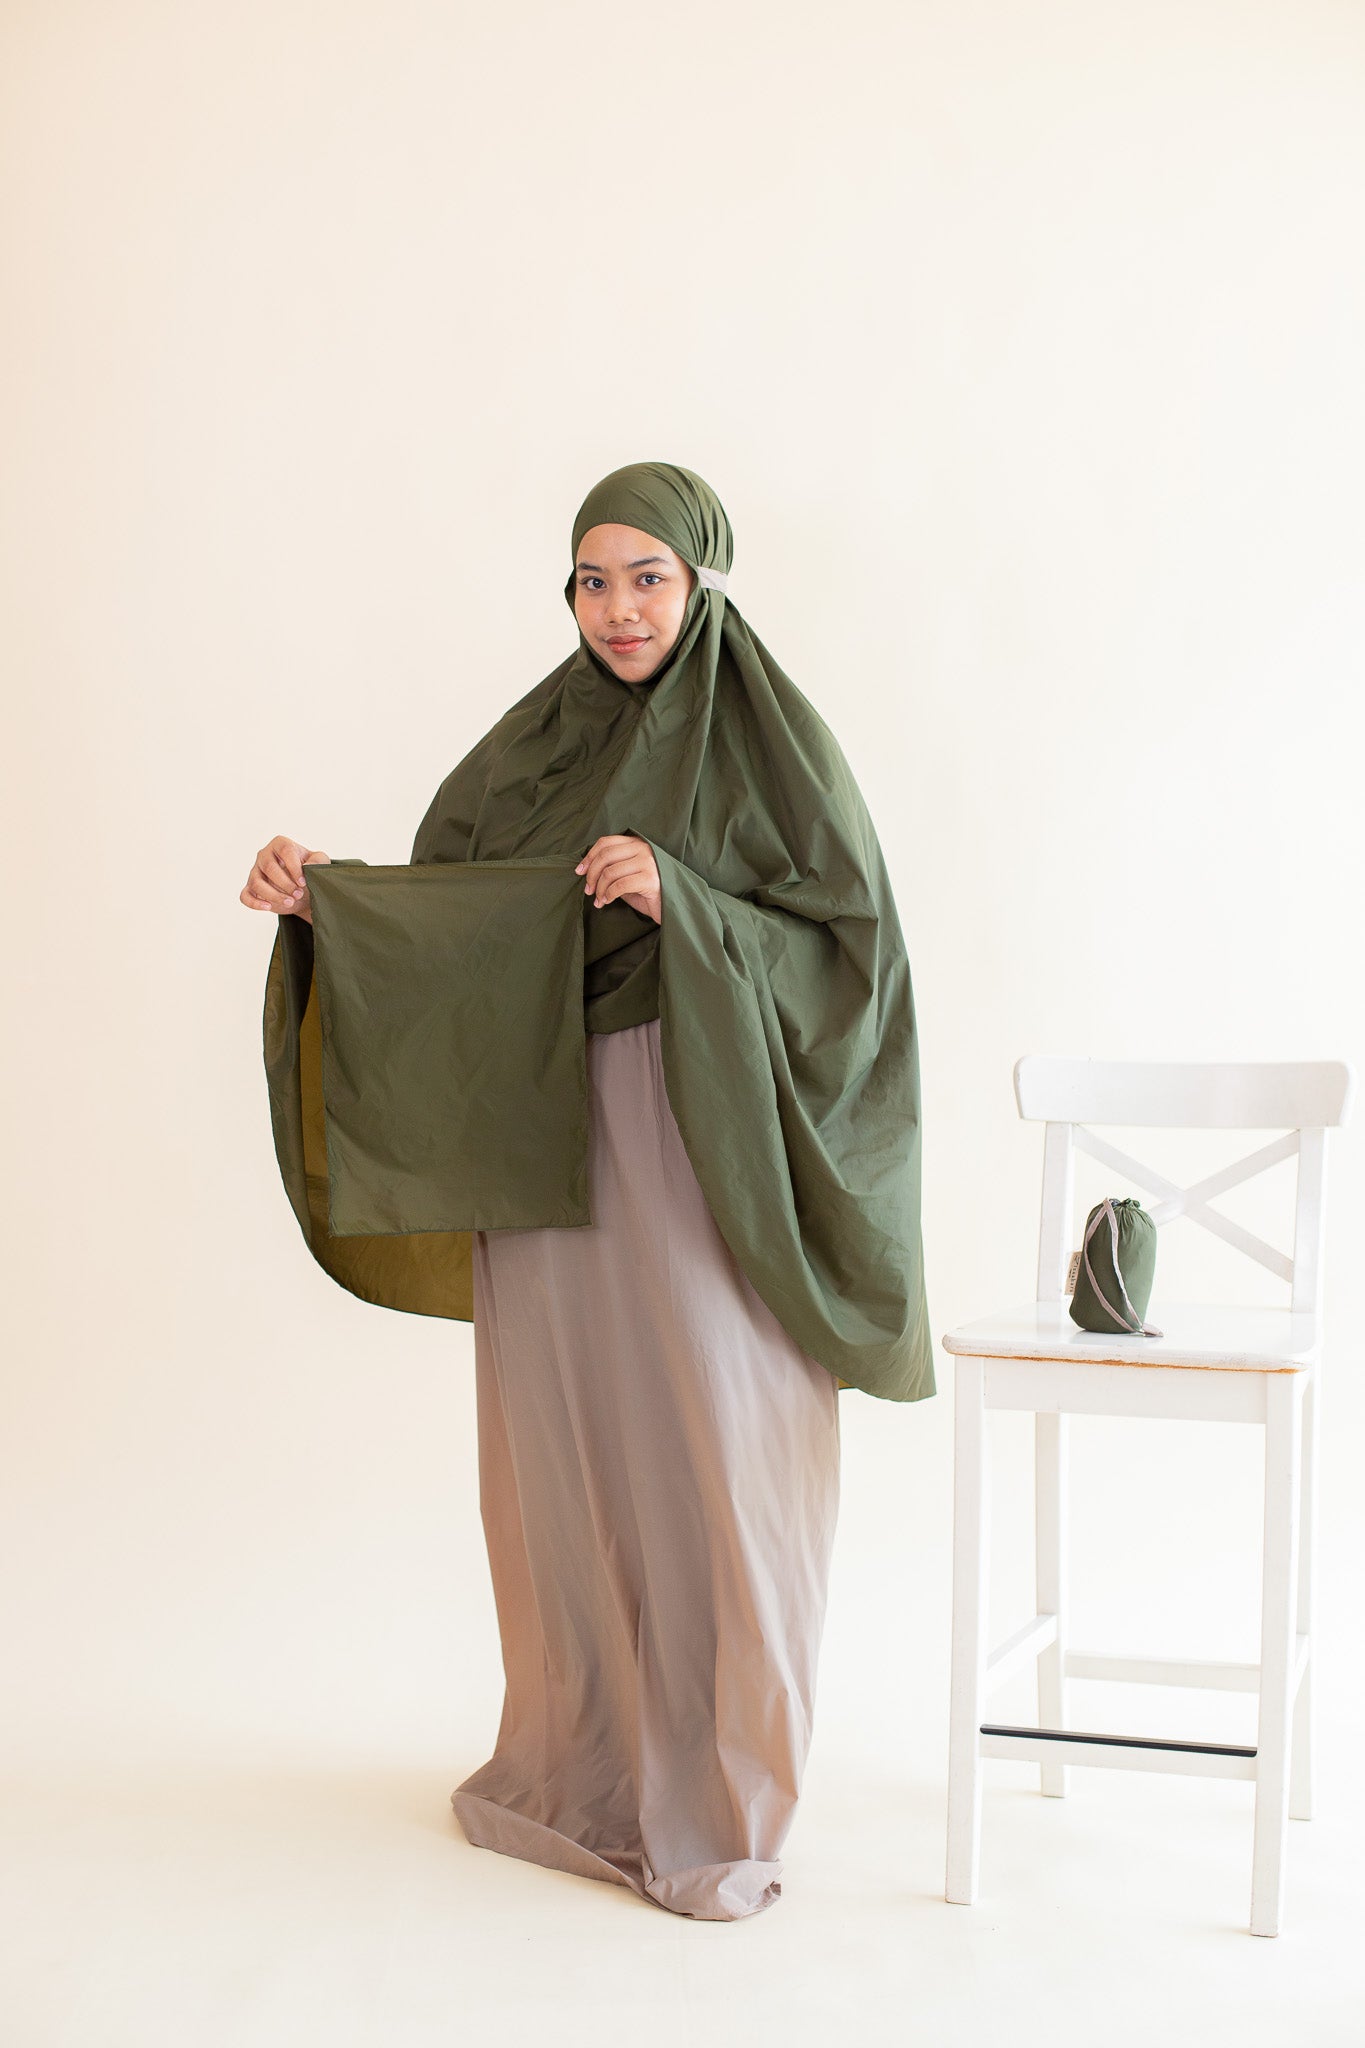 On-The-Go Prayerwear -  Duo Tone Marisa Telekung in Army Green ( Limited Edition )